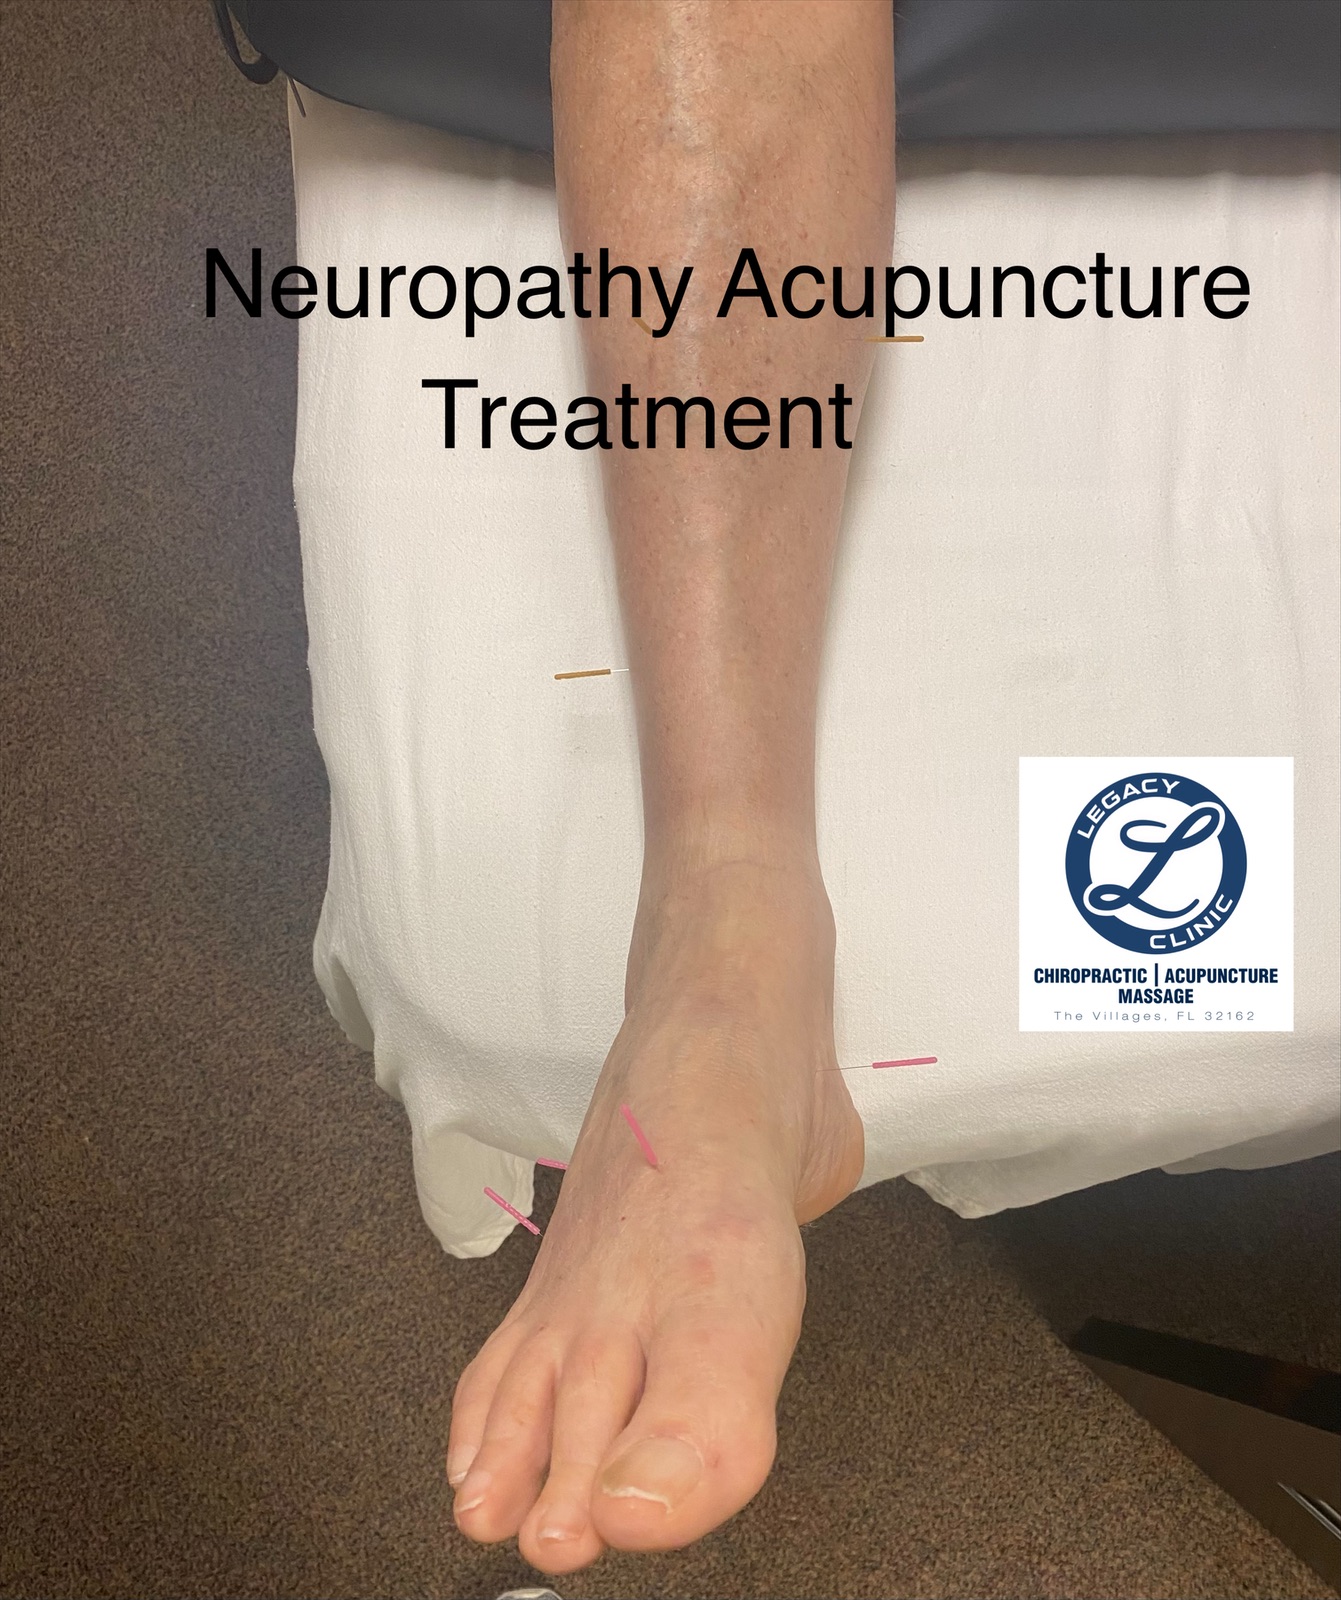 How Acupuncture Can Help Neuropathy